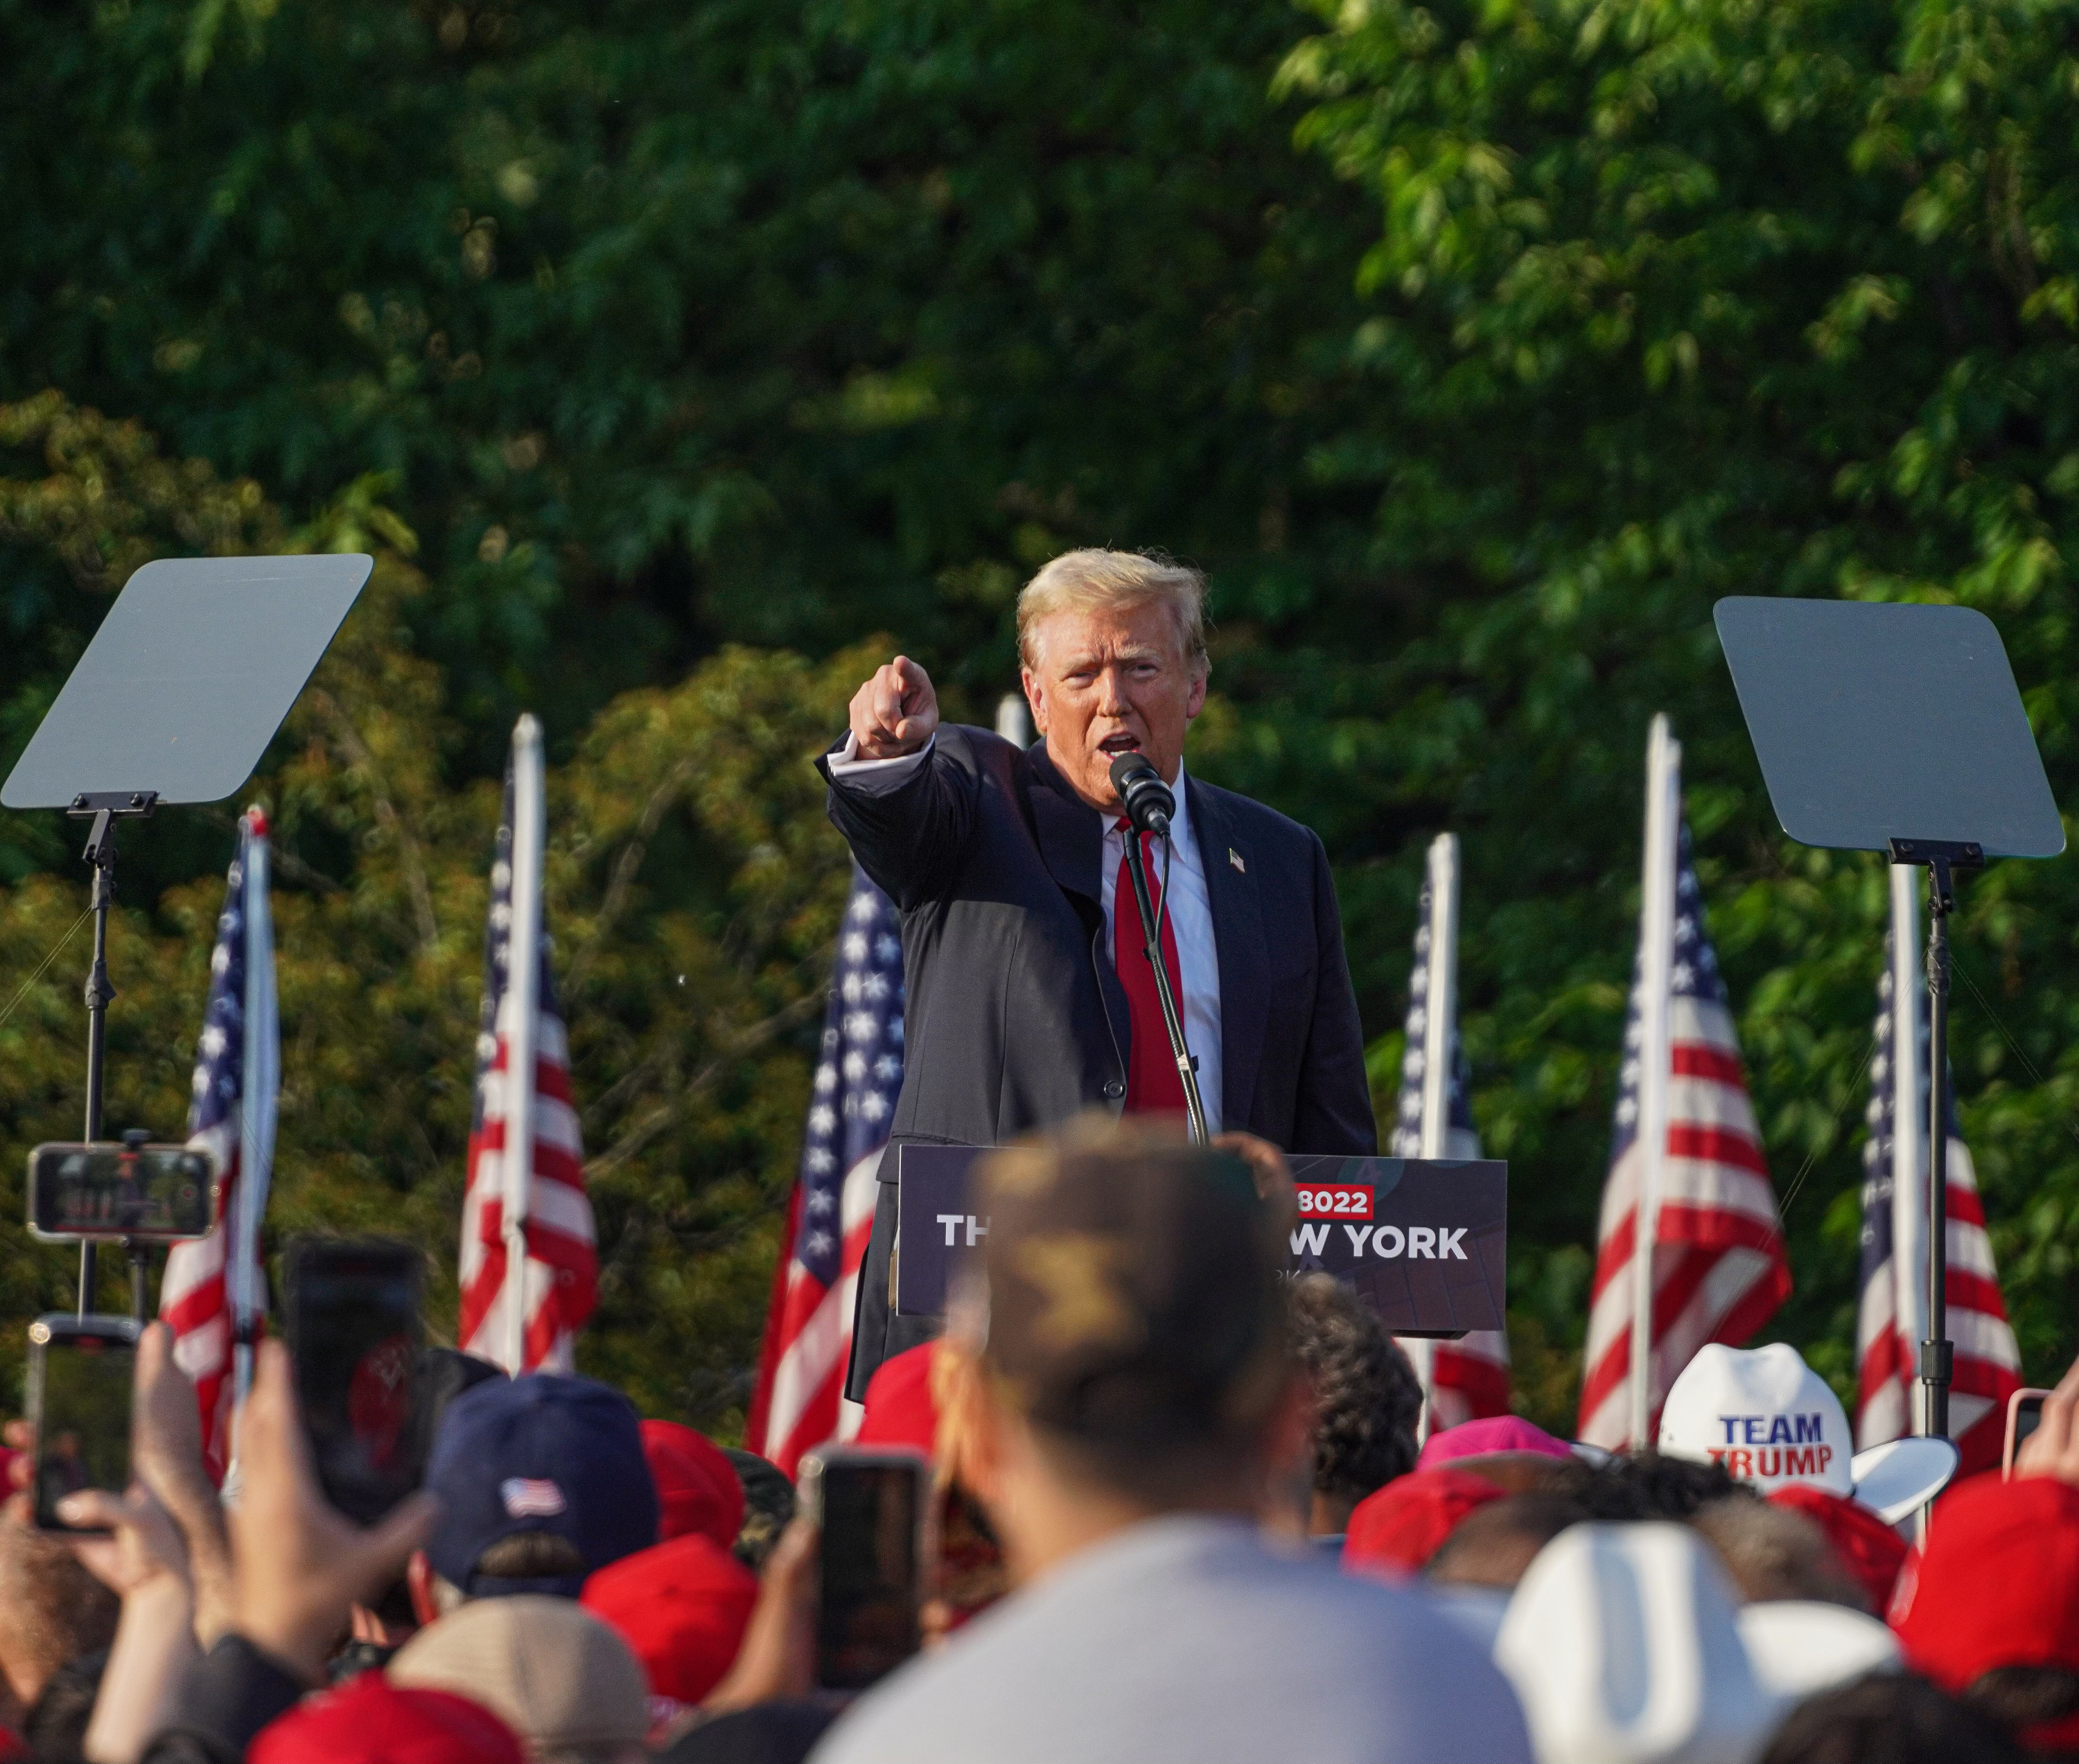 Inside his rally in Crotona Park, former President Donald Trump takes aim at Democrats and the media on May 23, 2024.